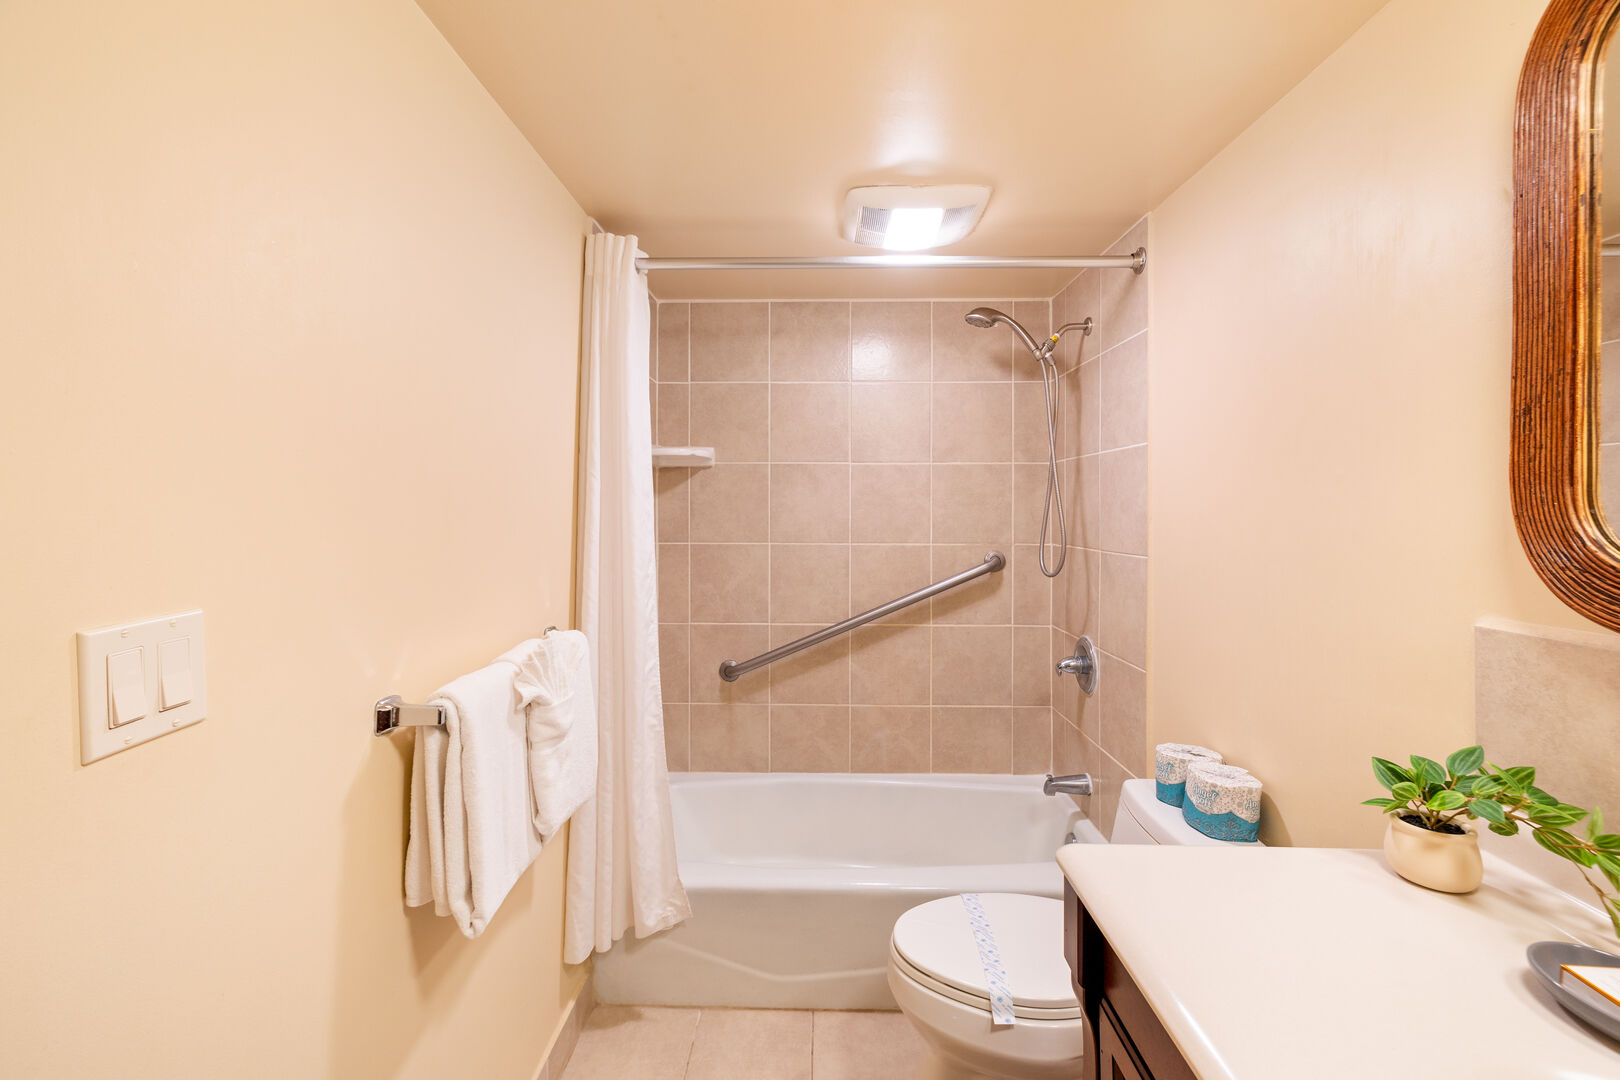 This unit has a full bathroom with a shower/tub combination!